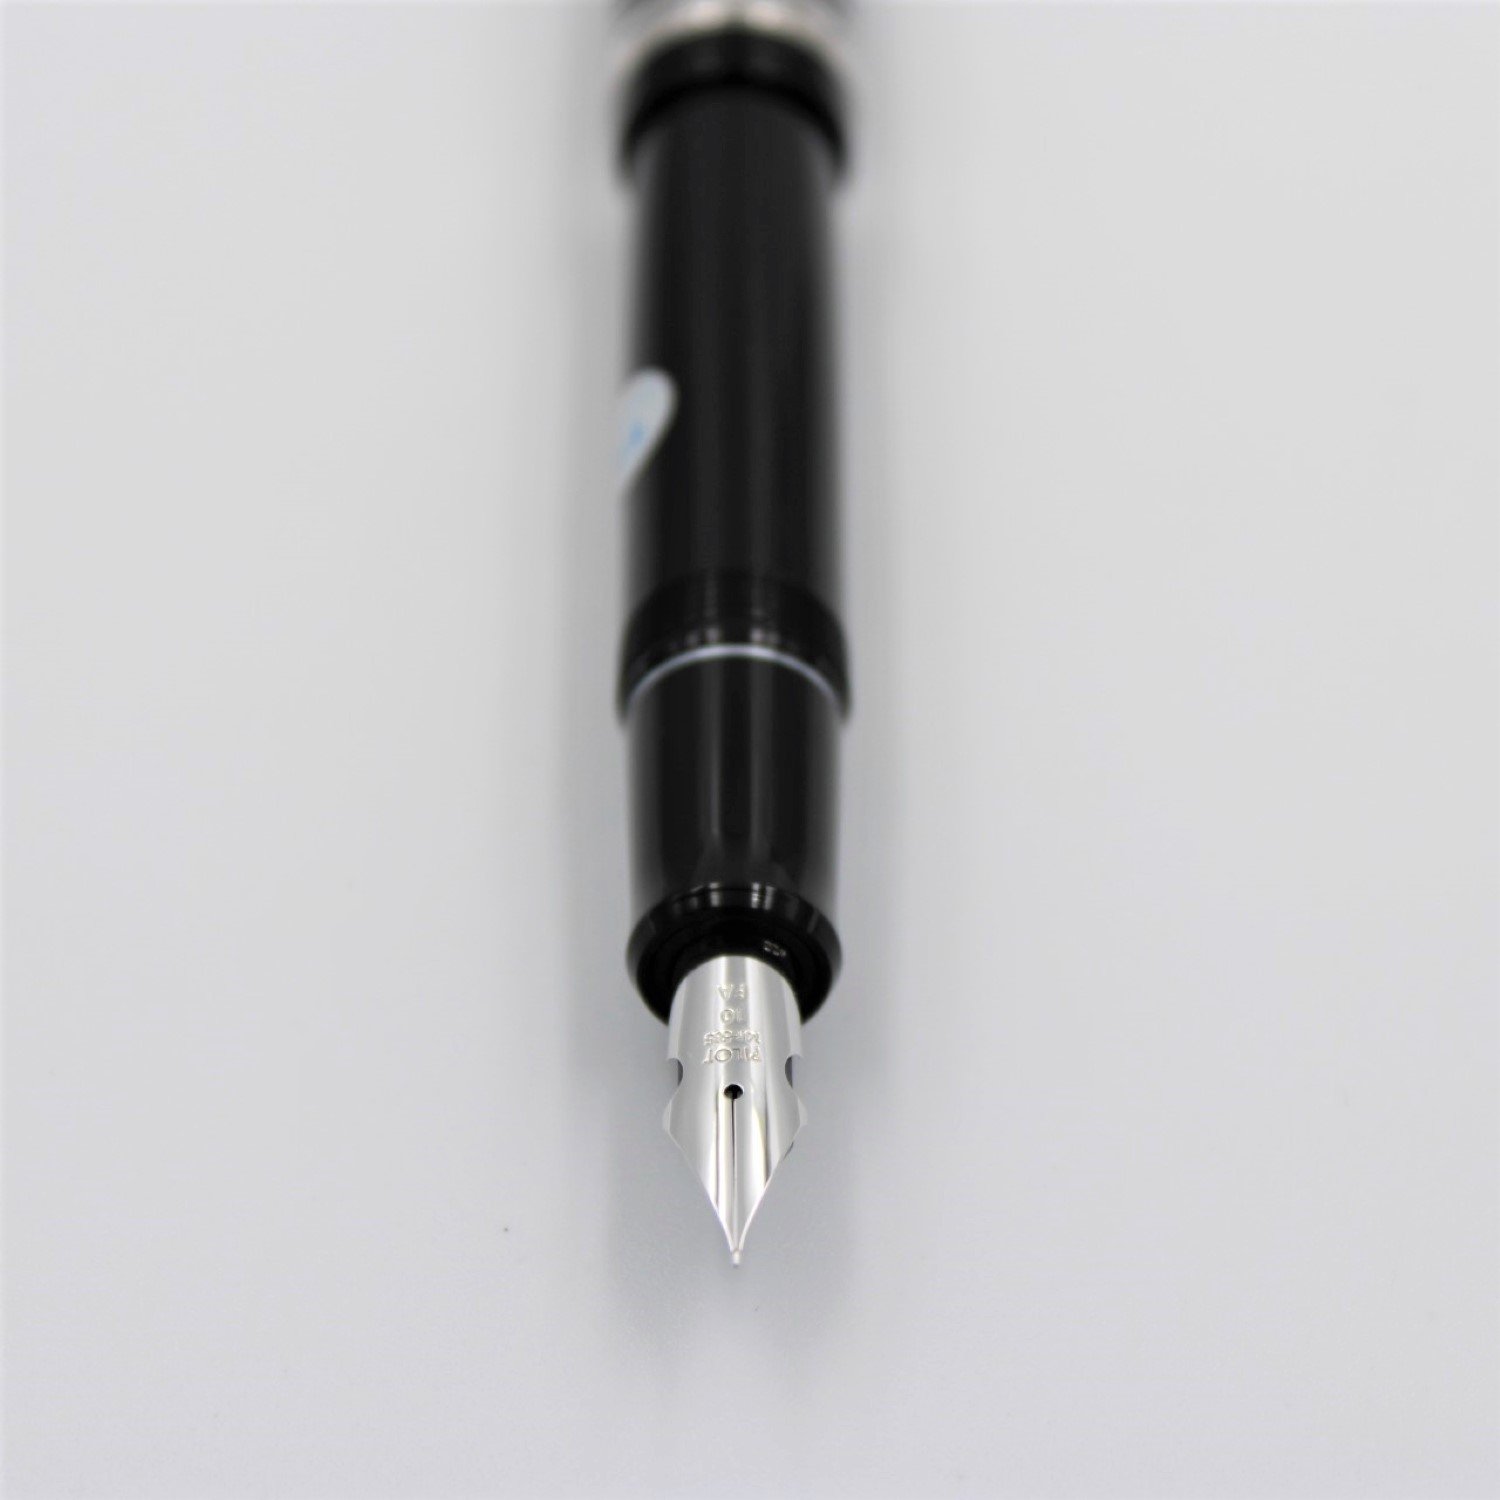 This Custom Heritage 912 Pilot Pen is available in-store and online at The Paintbox, home of the widest range of traditional and progressive Art Supplies in Adelaide. At The PaintBox we source and stock quality art supplies which we import directly. This means that you have access to a greater variety and pay less. These are perfect for any artists from amateur to professional. It is also perfect for any budget size. Check out our loyalty rewards programme, which makes your artistic ambitions achievable. At these prices why not give these a go. Be sure to check out our other fabulous finds on our website and start saving today. Our knowledgeable staff at The PaintBox can guide you through our carefully selected ranges of art supplies for all applications. This is only a small selection of our stock. We sell many brands, weights, and textures, in-store only. Please call 08 8388 7776 to enquire. We offer art tuition too! THIS PILOT CUSTOM HERITAGE 912 CAN BE DELIVERED ANYWHERE WITHIN AUSTRALIA OR NEW ZEALAND